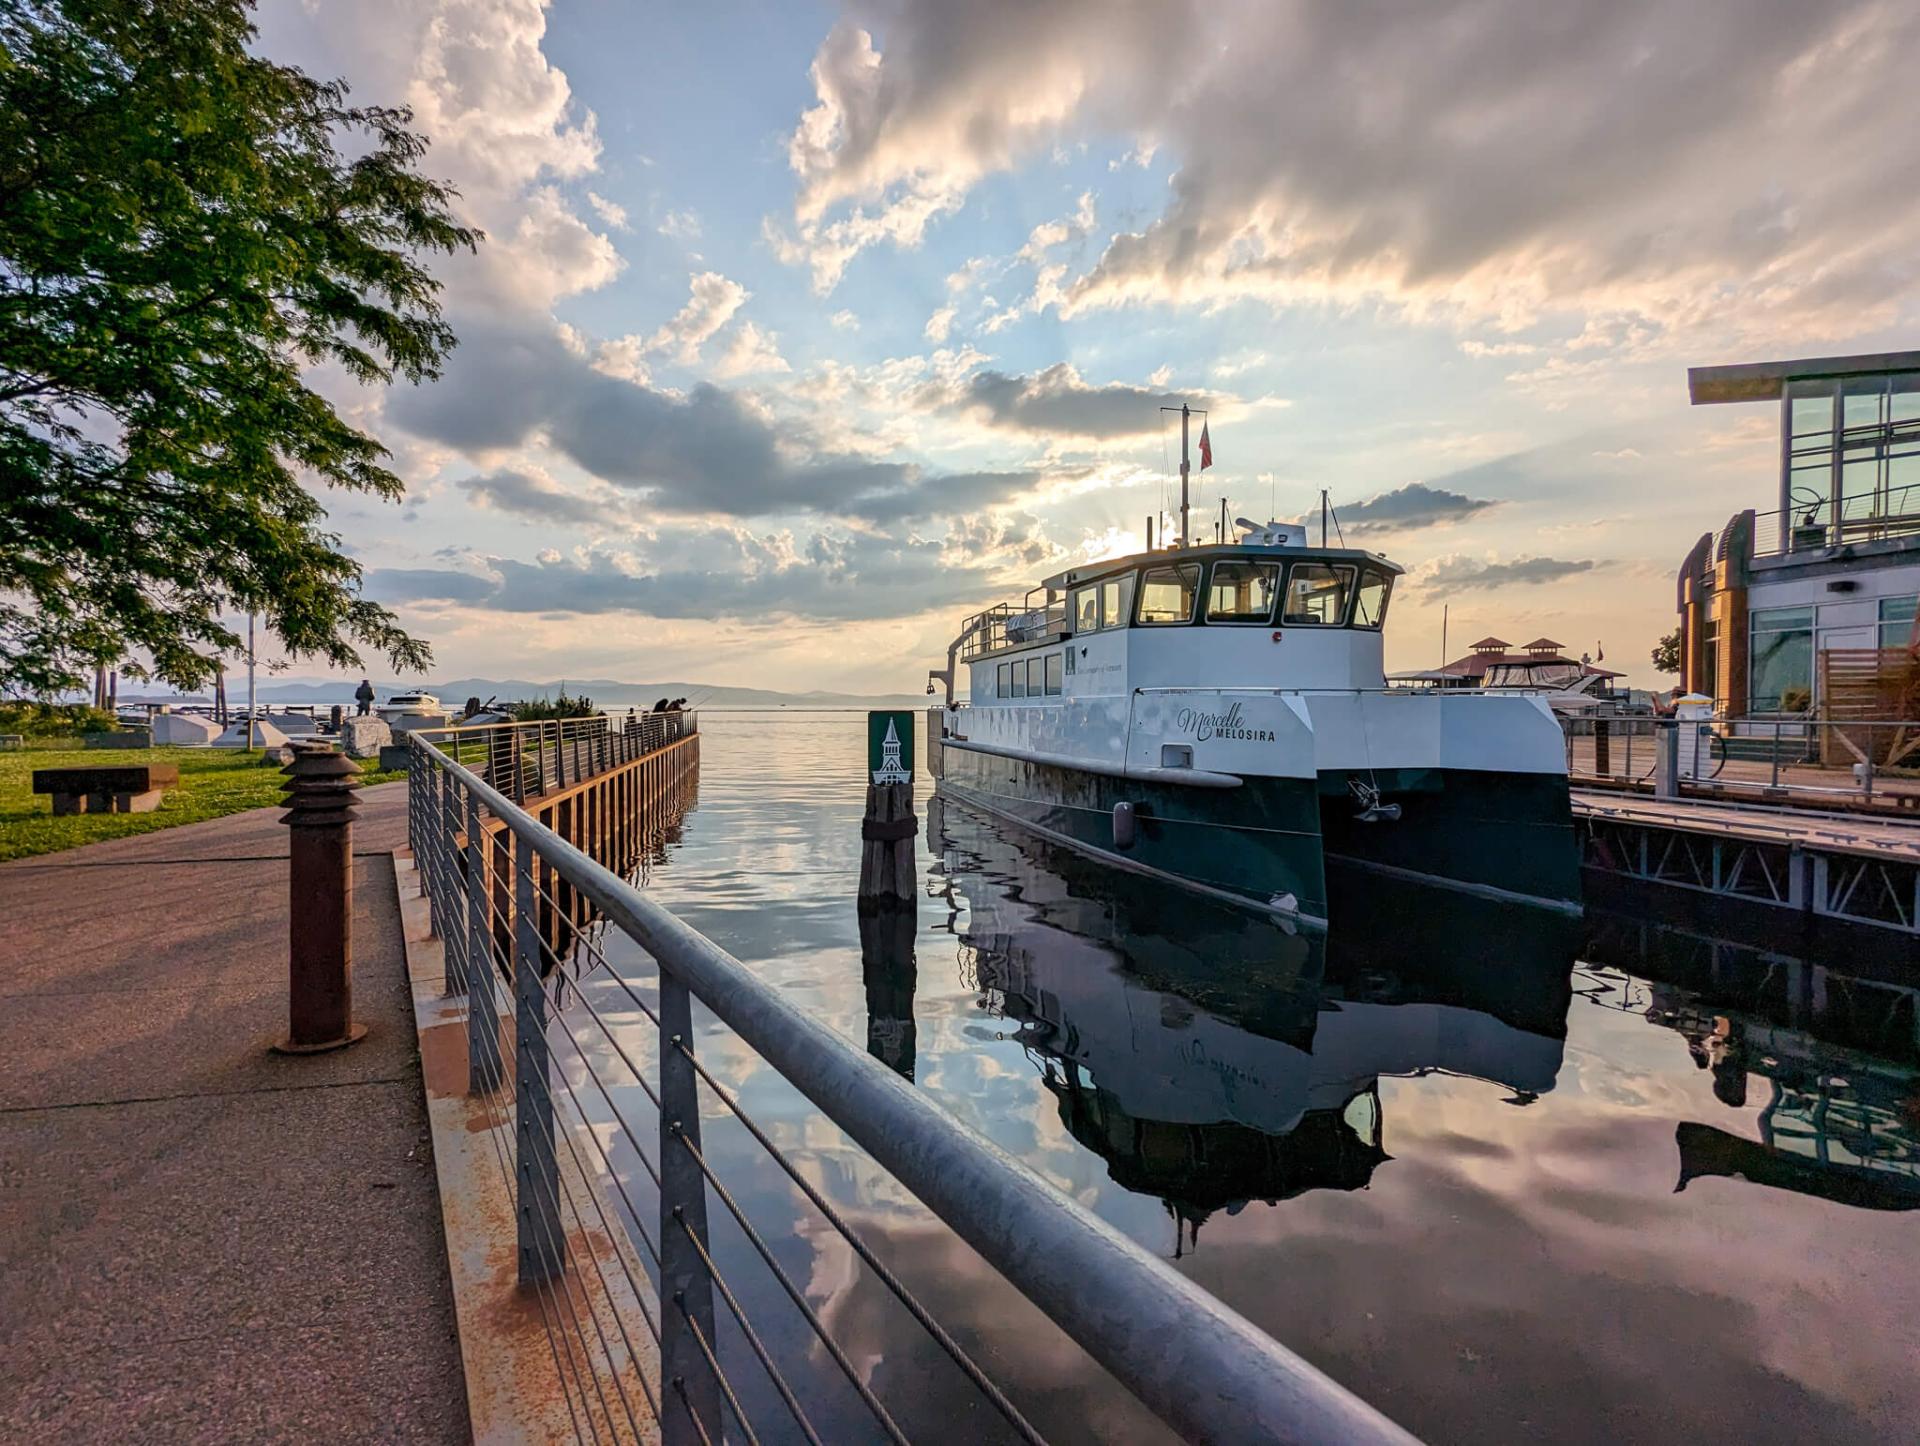 The UVM Research Vessel, Marcelle Melosira, at the dock on the Burlington, VT waterfront